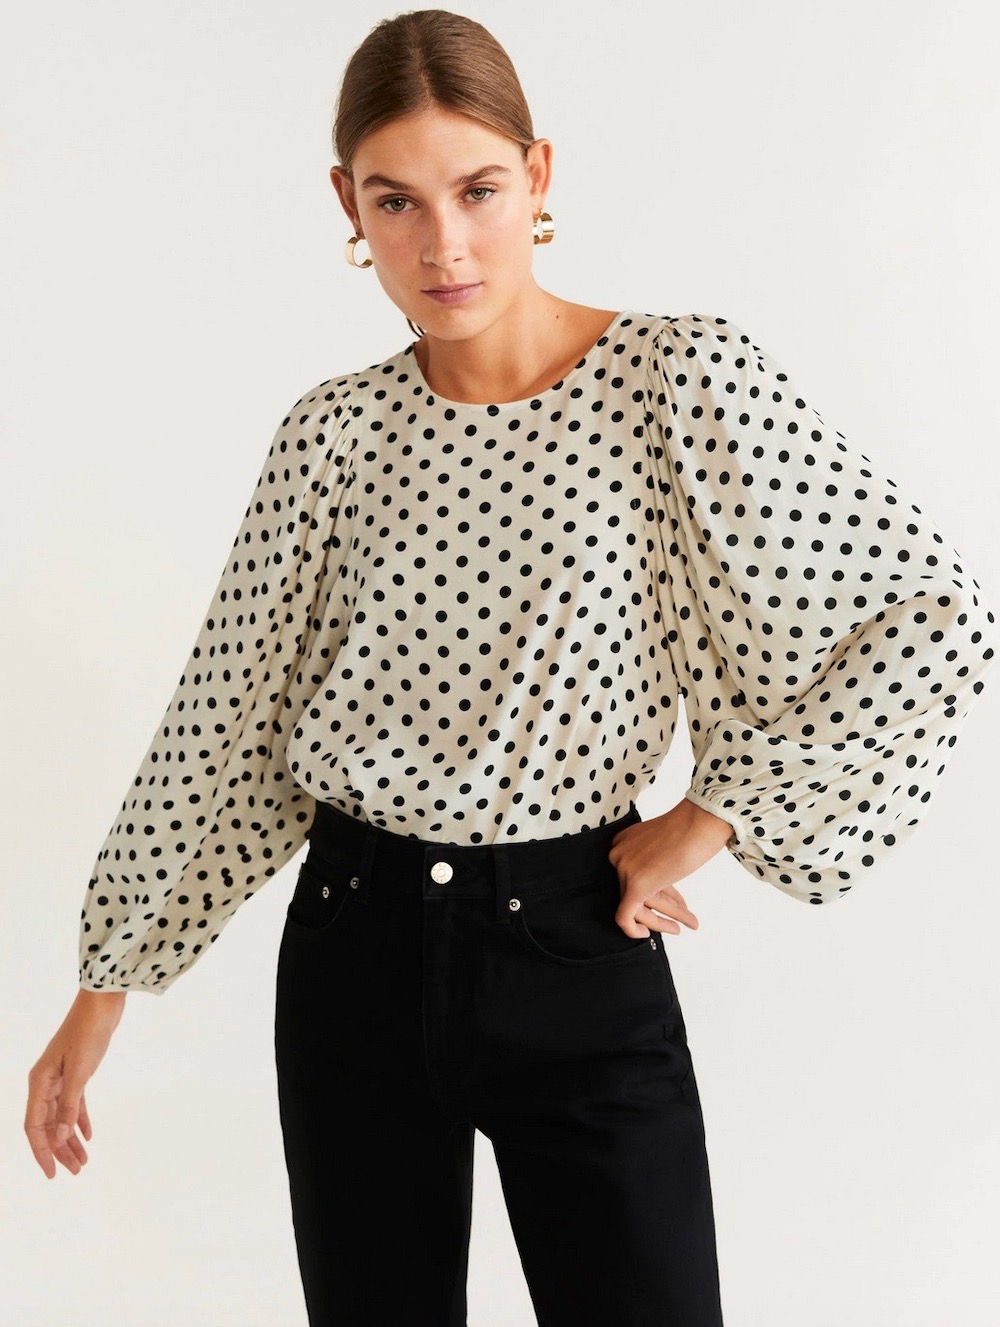 Top Statement Sleeve Tops to Buy Now - theFashionSpot